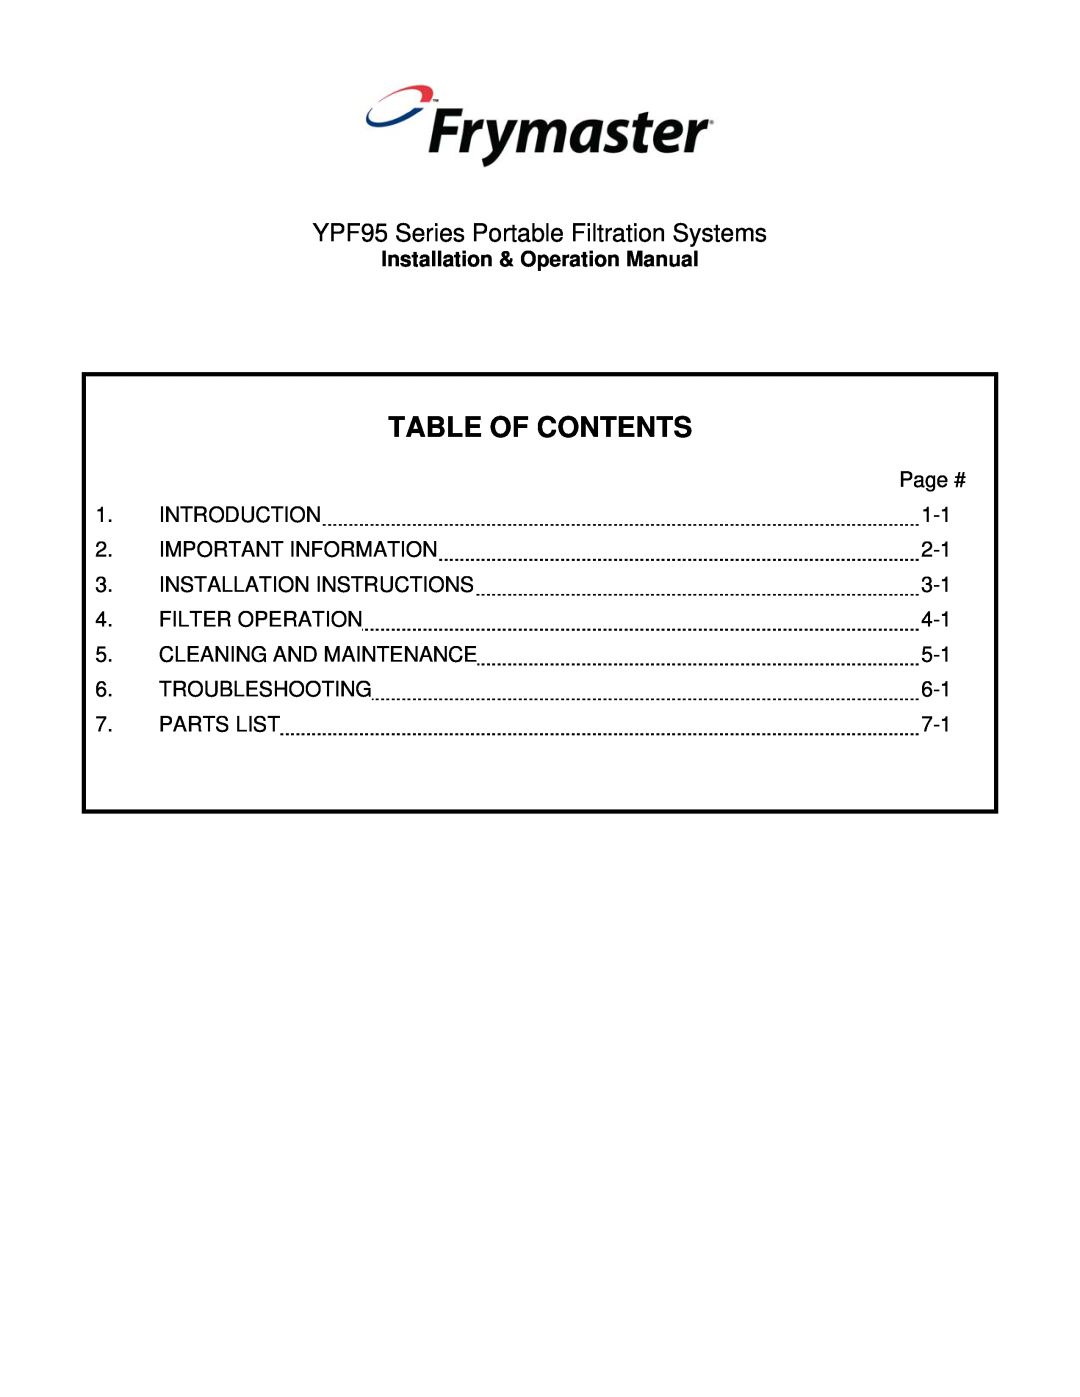 Frymaster operation manual Table Of Contents, YPF95 Series Portable Filtration Systems 